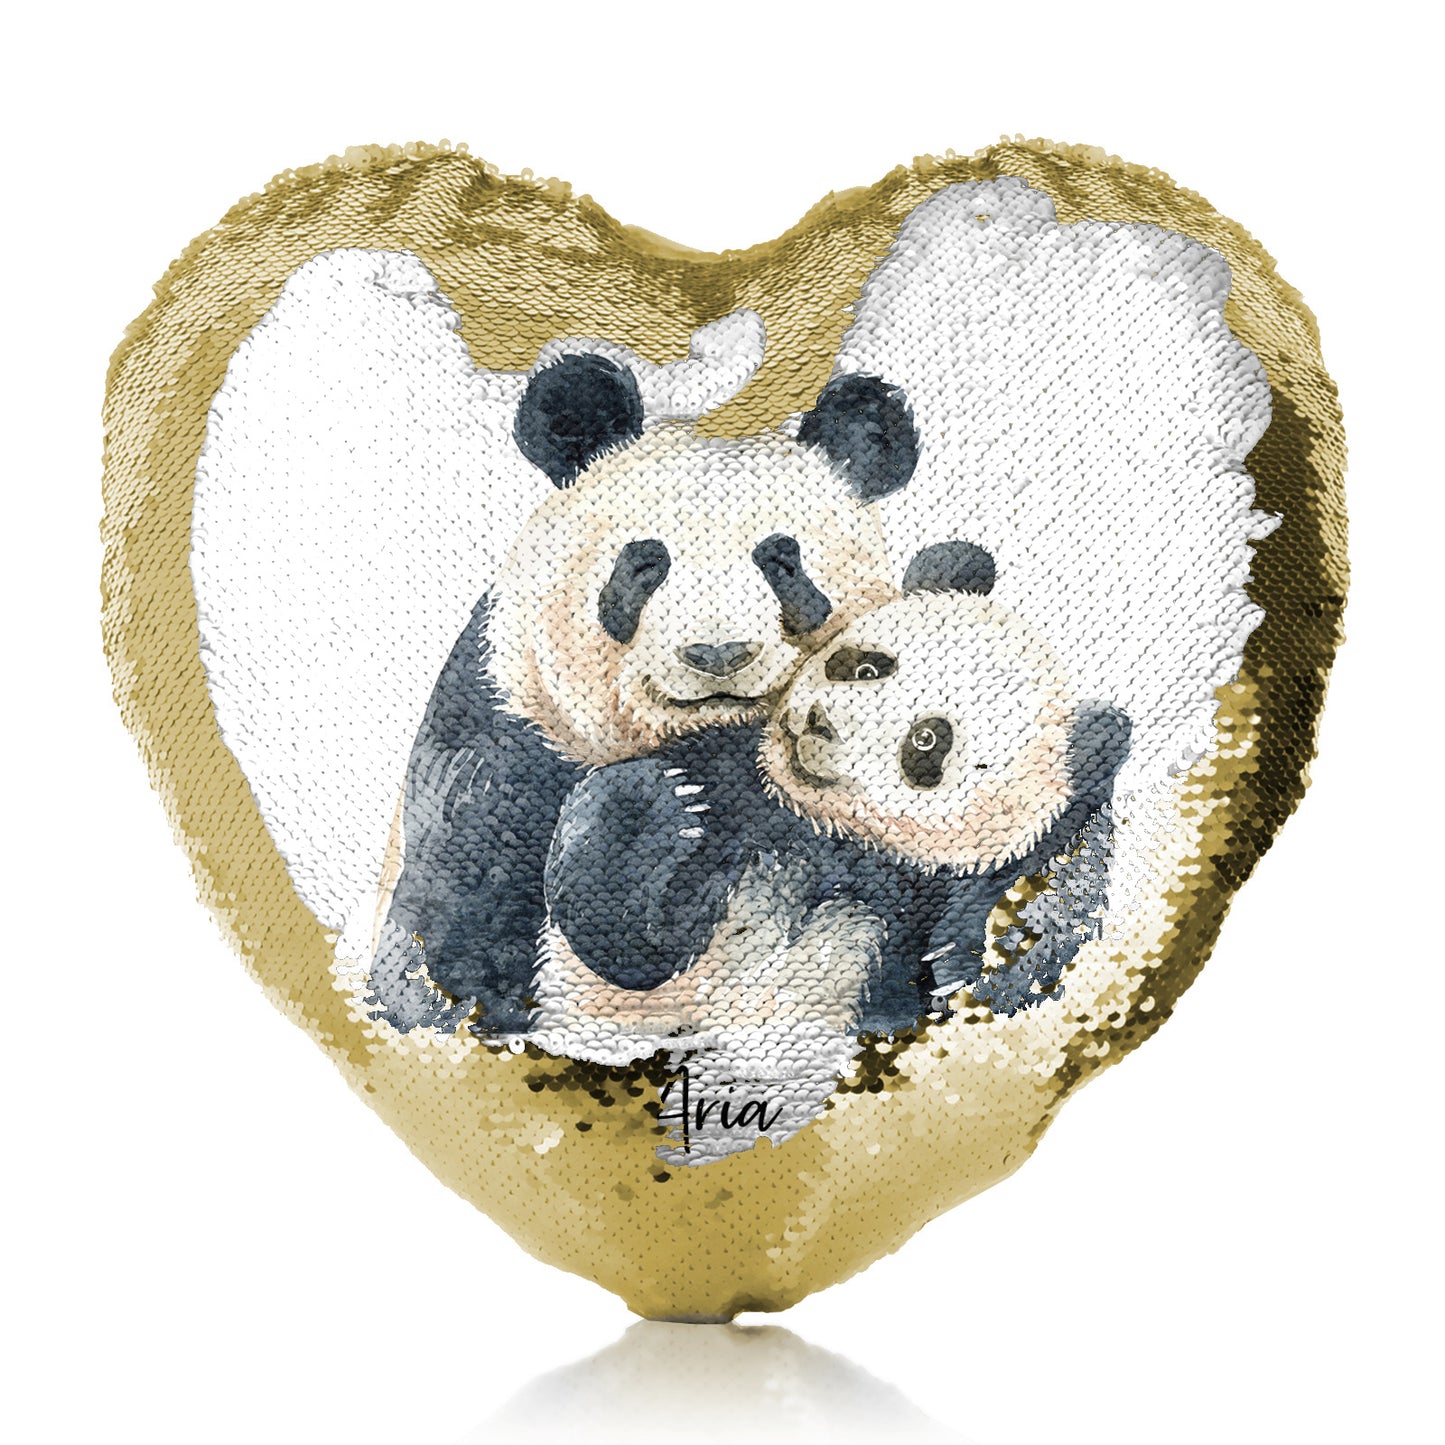 Personalised Sequin Heart Cushion with Welcoming Text and Embracing Mum and Baby Pandas